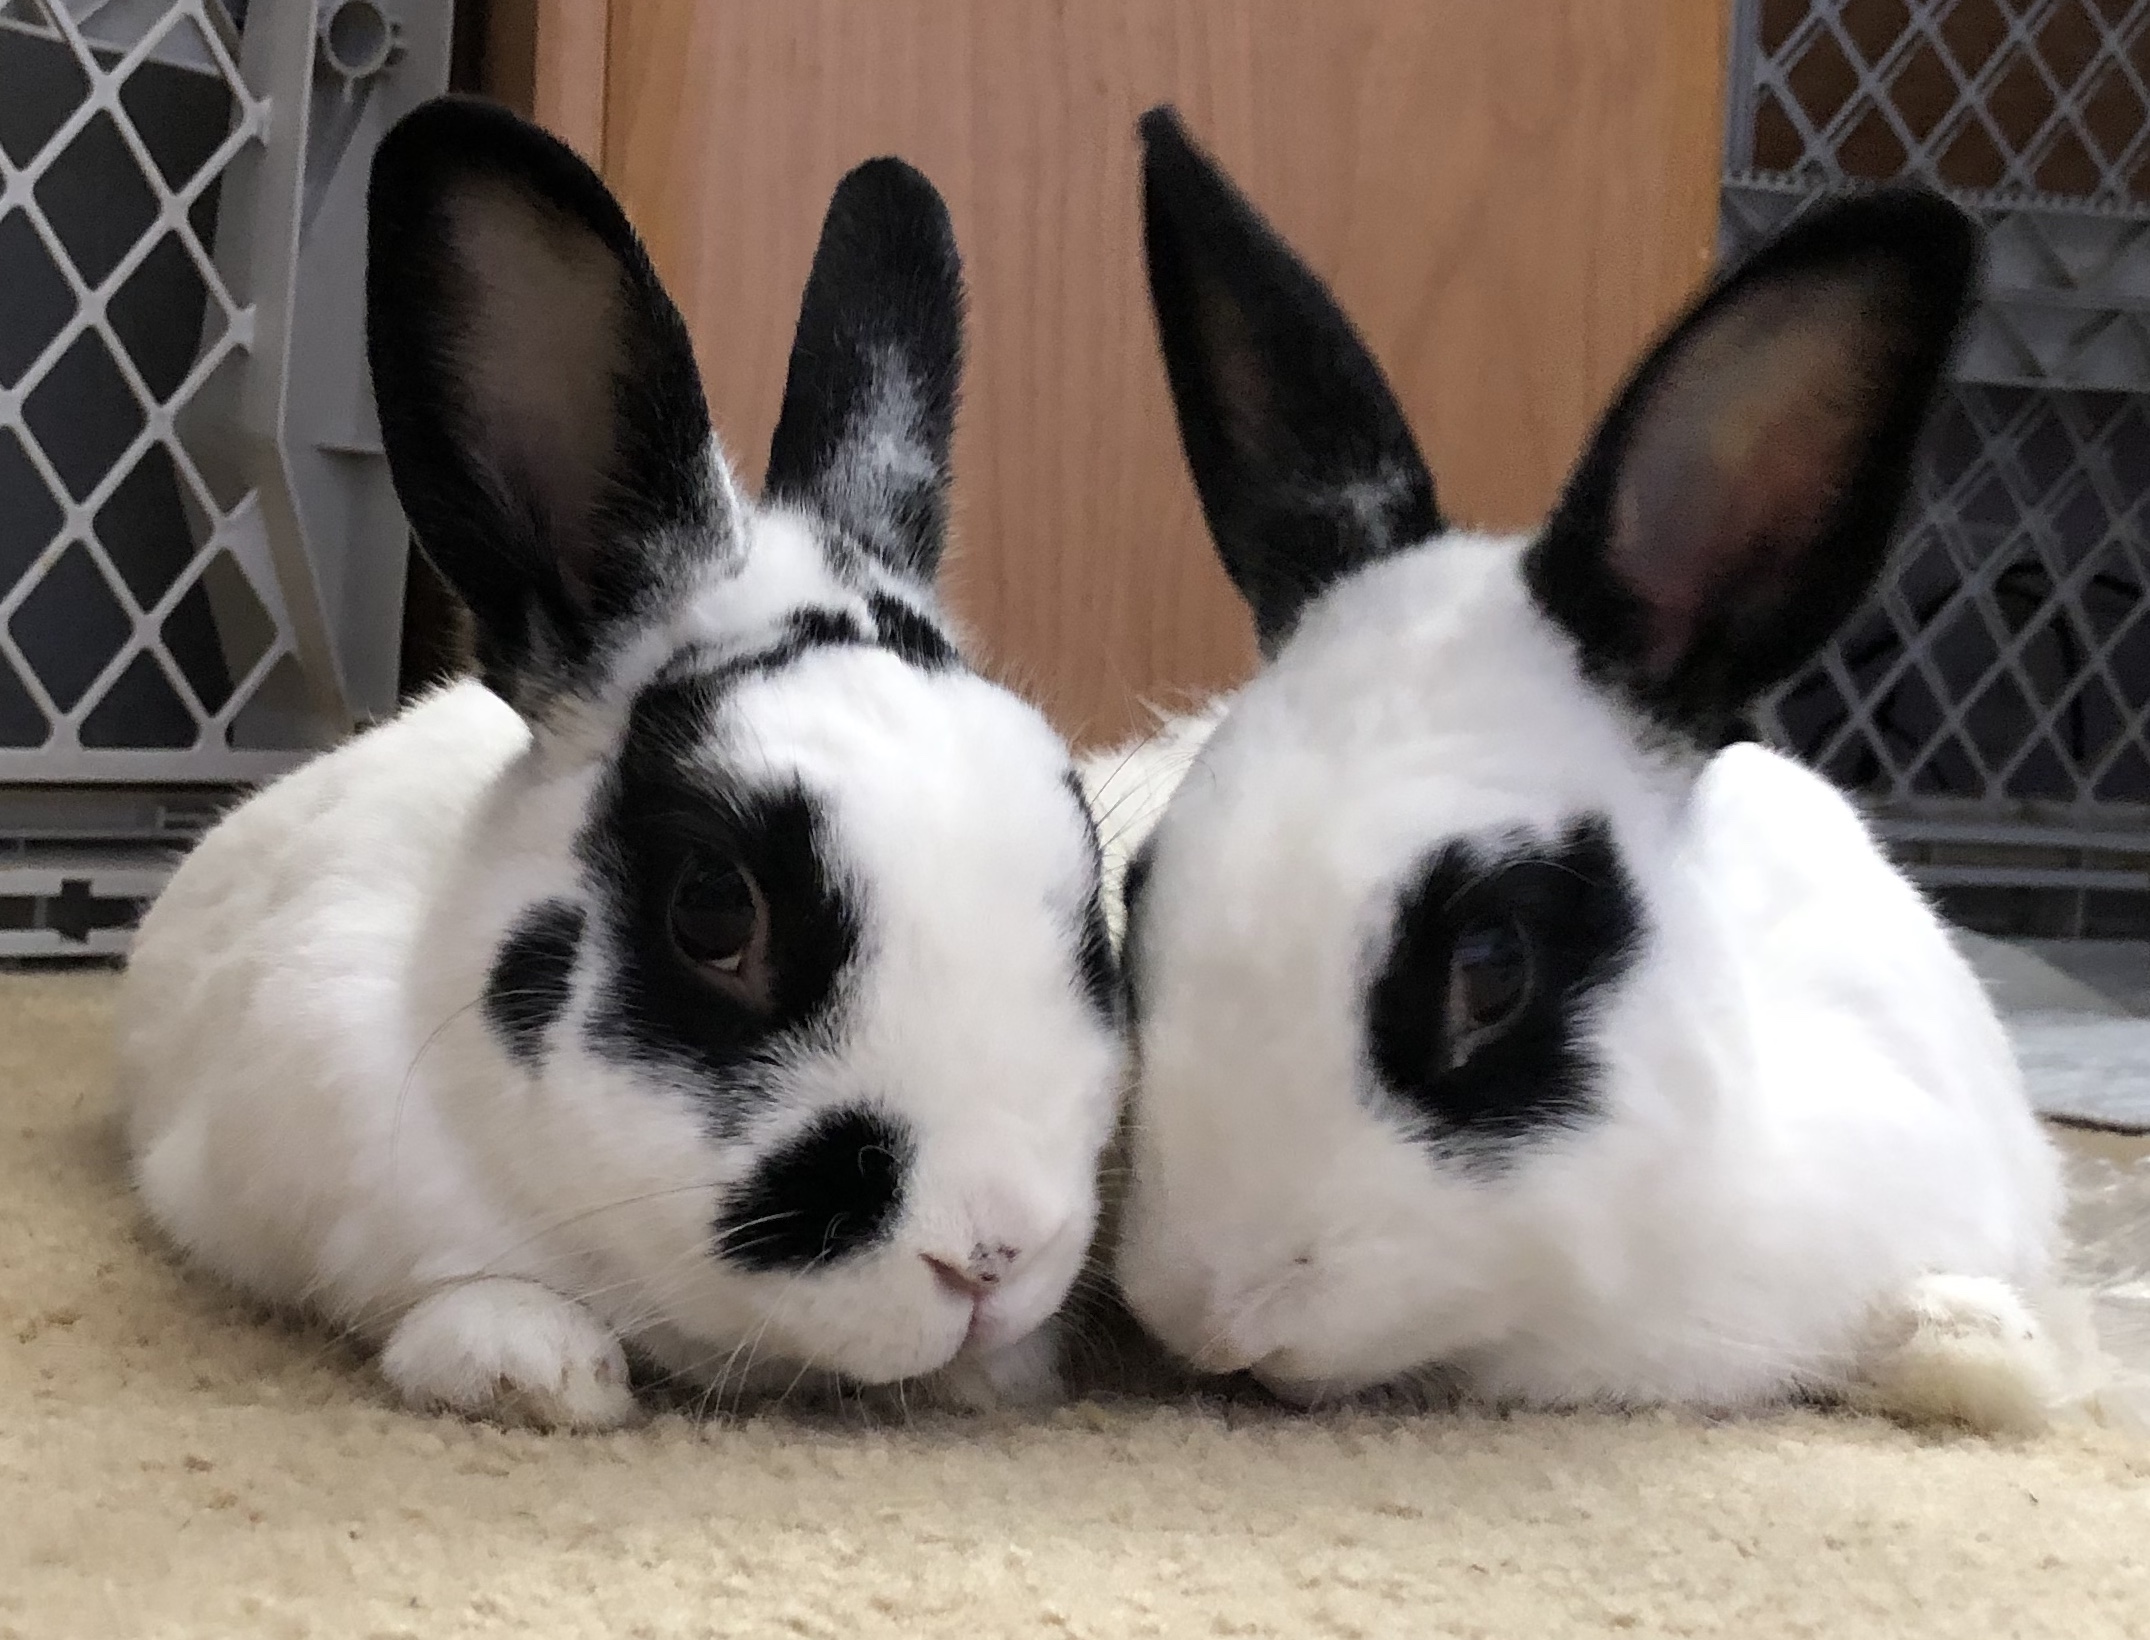 Spaying and neutering your rabbits is one of the most important things you can do for your bunnies.